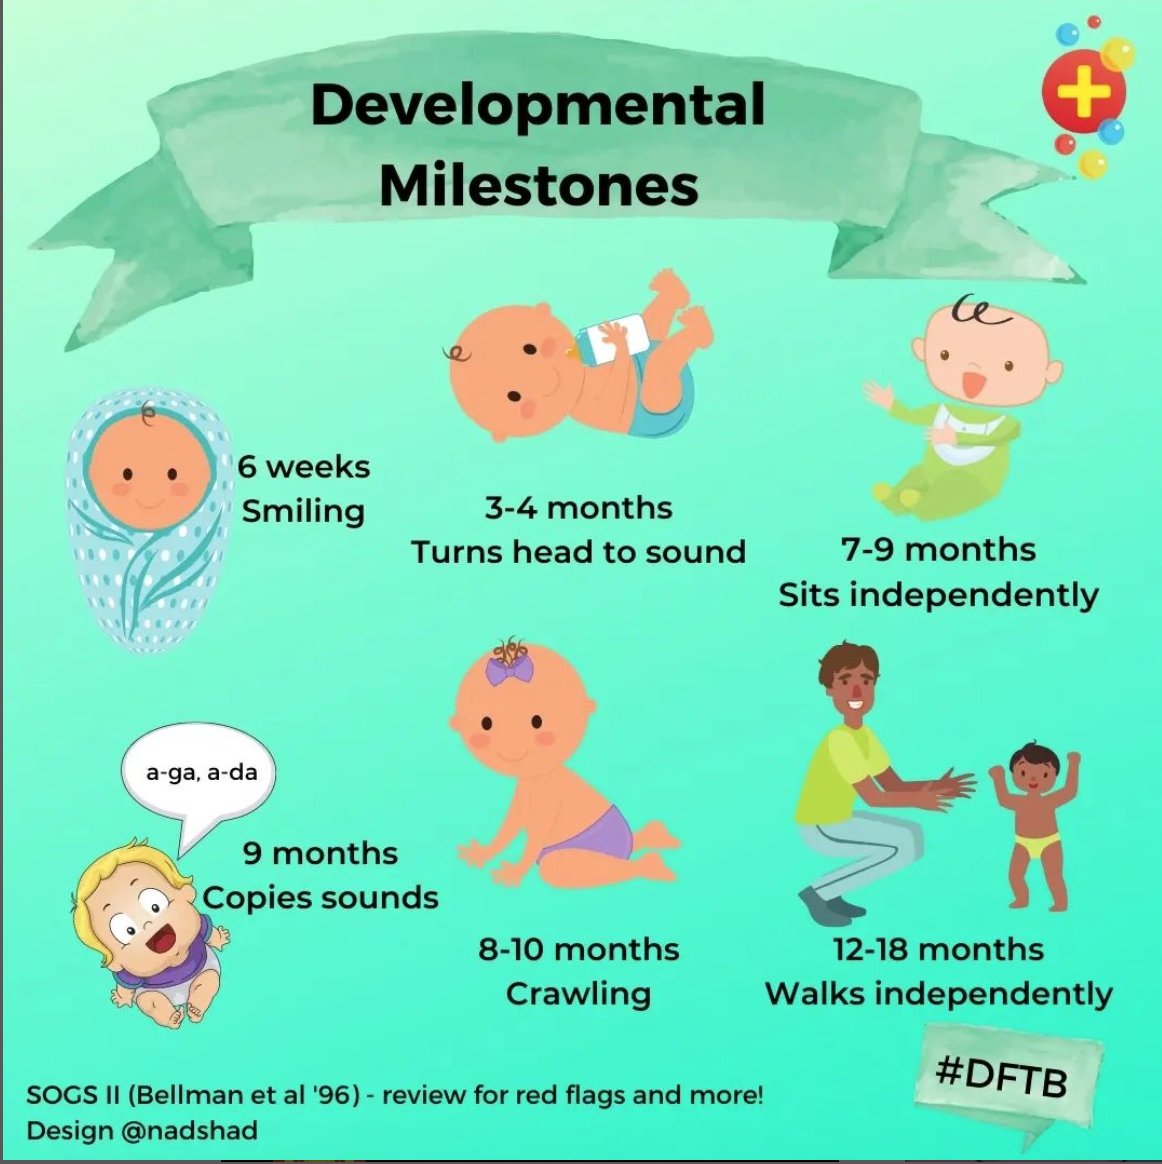 Opportunistic checking of developmental milestones in our young patients can help identify issues or parental concerns. Early identification leads to early assessment and early intervention! #dftb #postitpearls #foamed #paediatrics #development